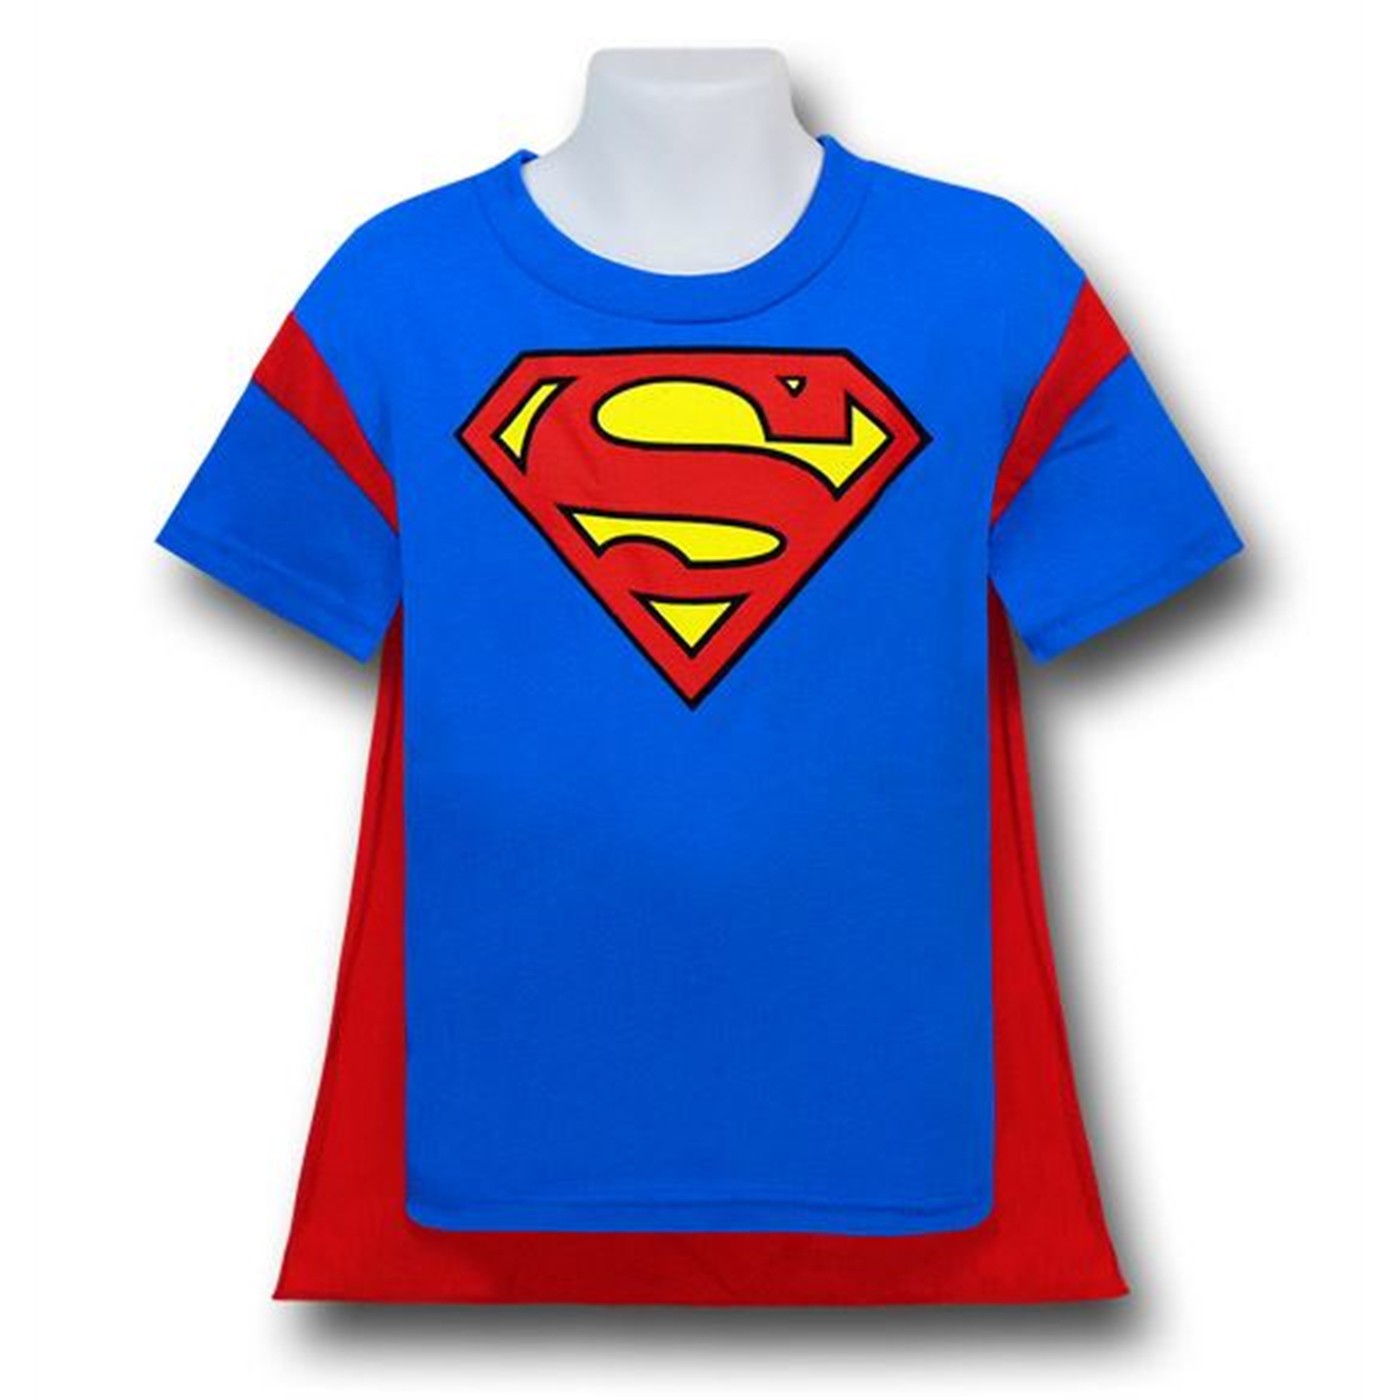 DC Comics Superman Toddler Boys T-Shirts 2 to Choose Sizes 2T 3T 4T and 5T NWT 